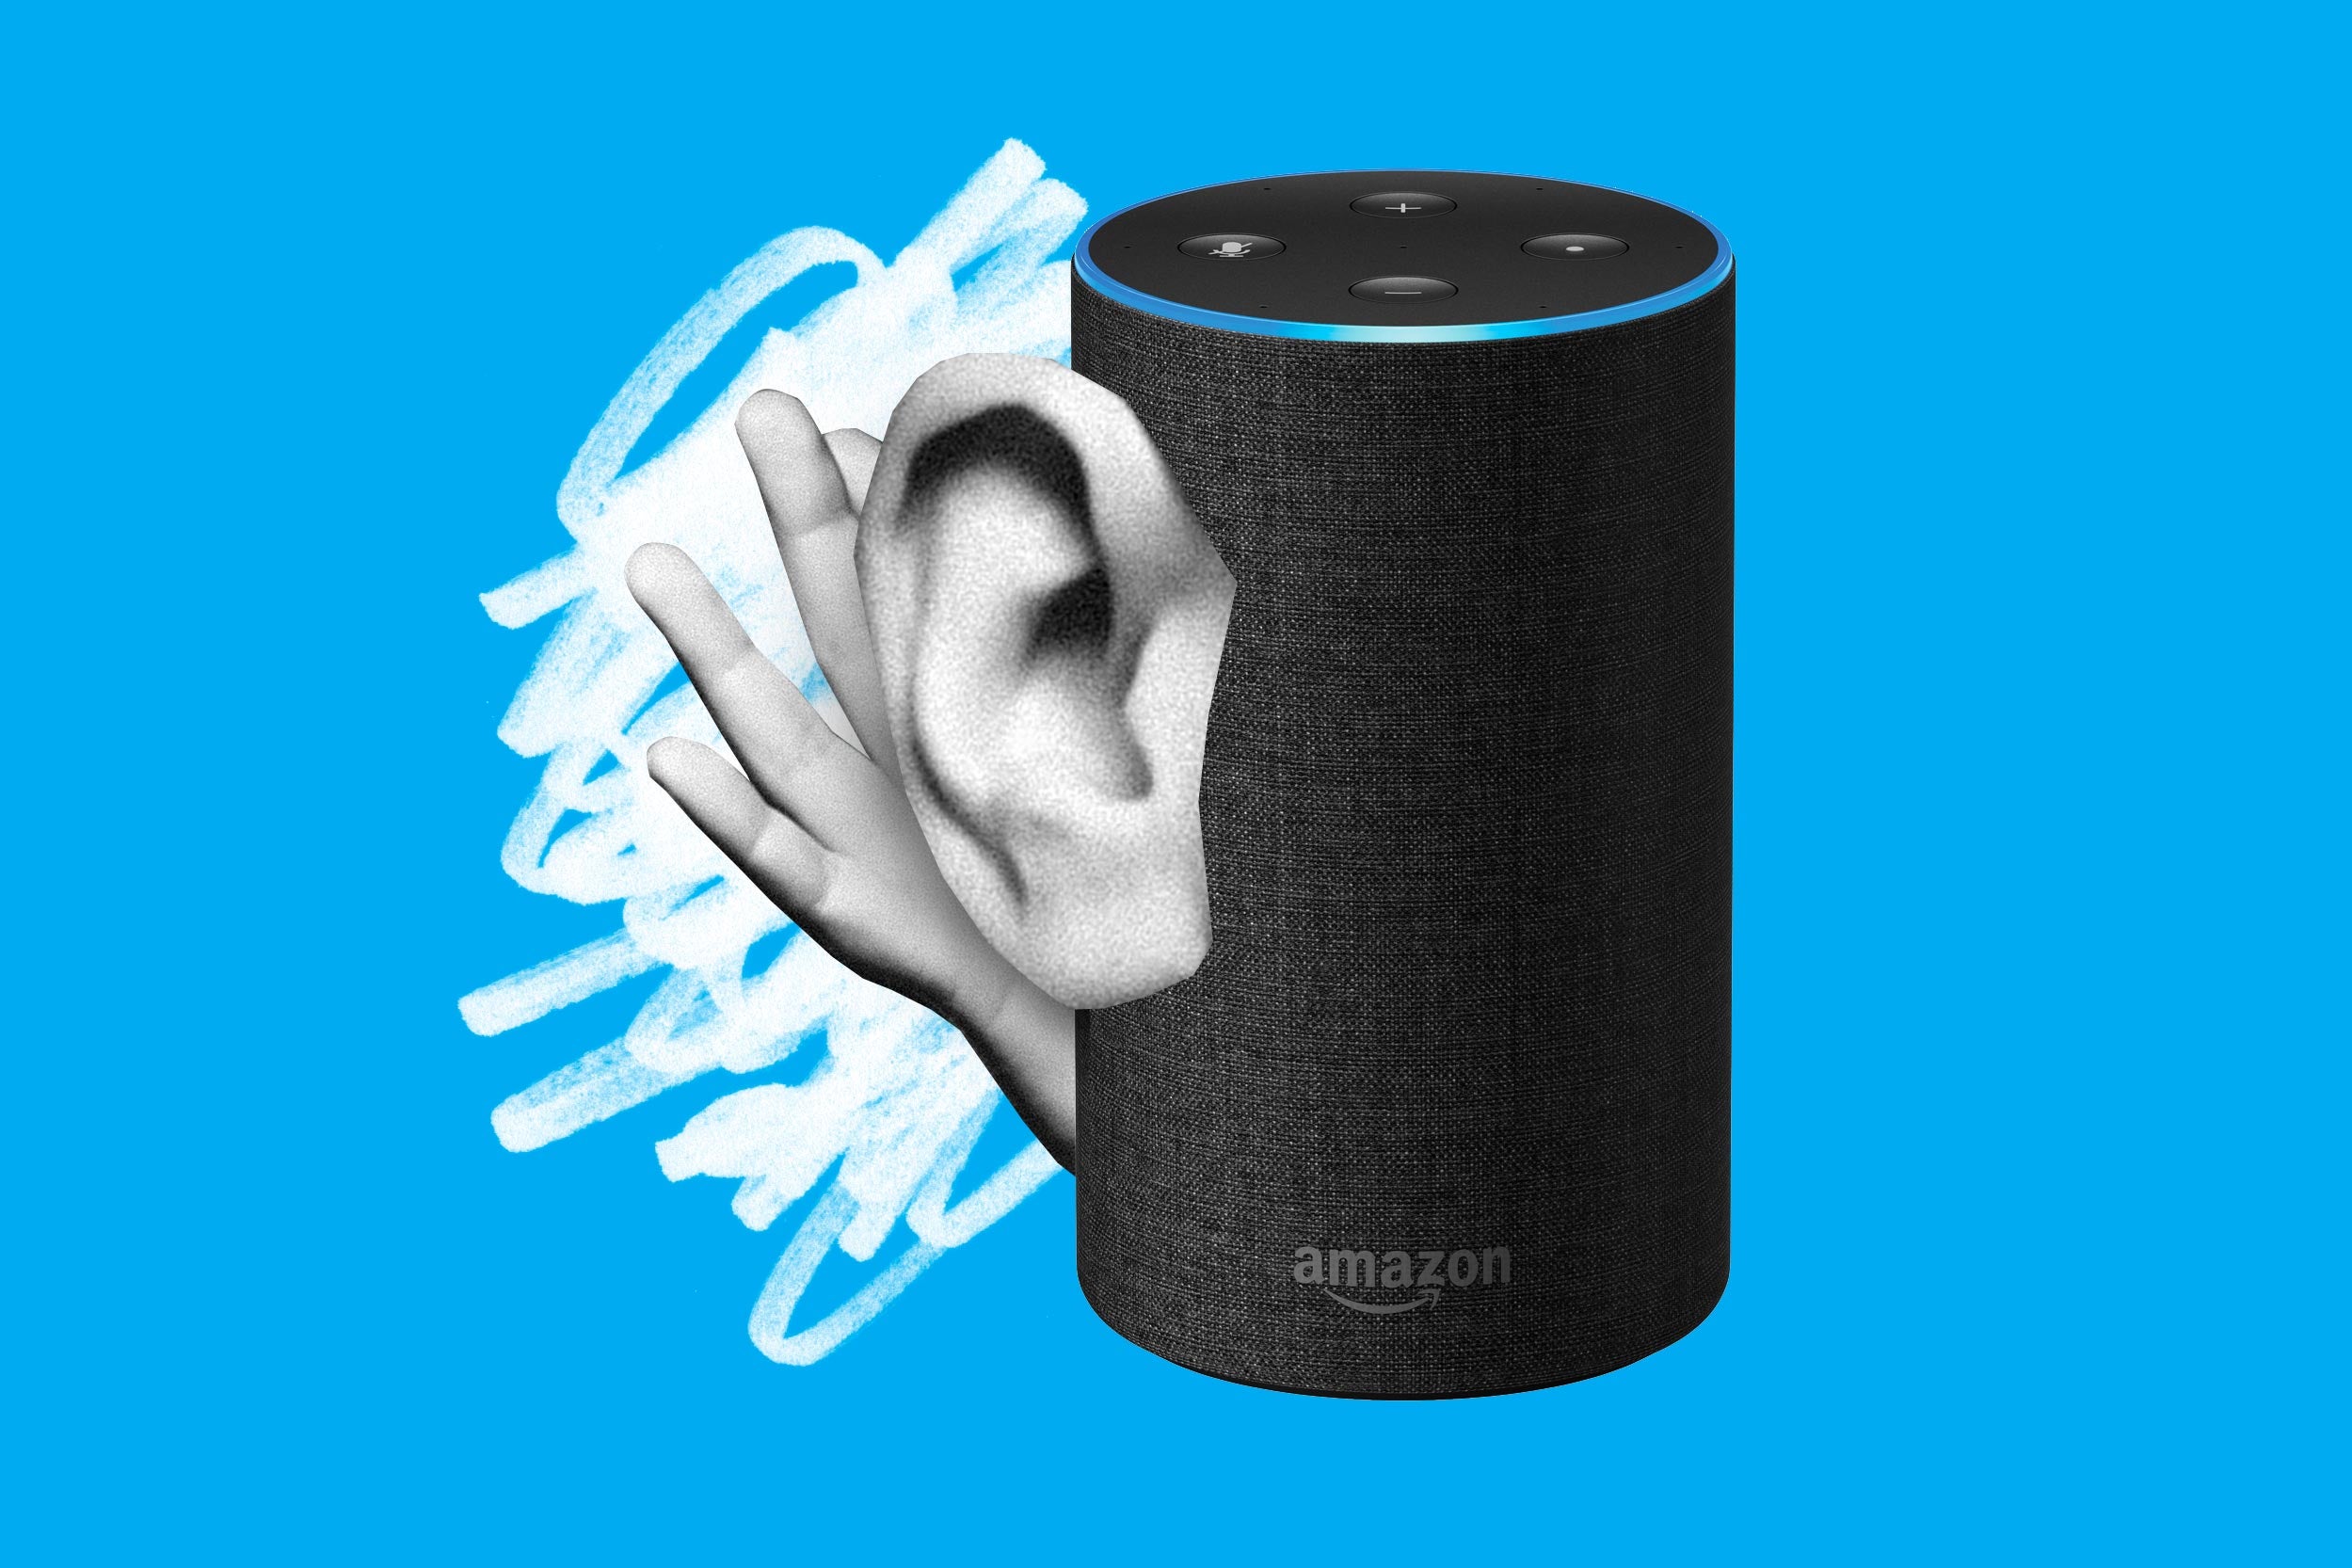 An Amazon Echo with an ear cupped with a hand, eavesdropping.